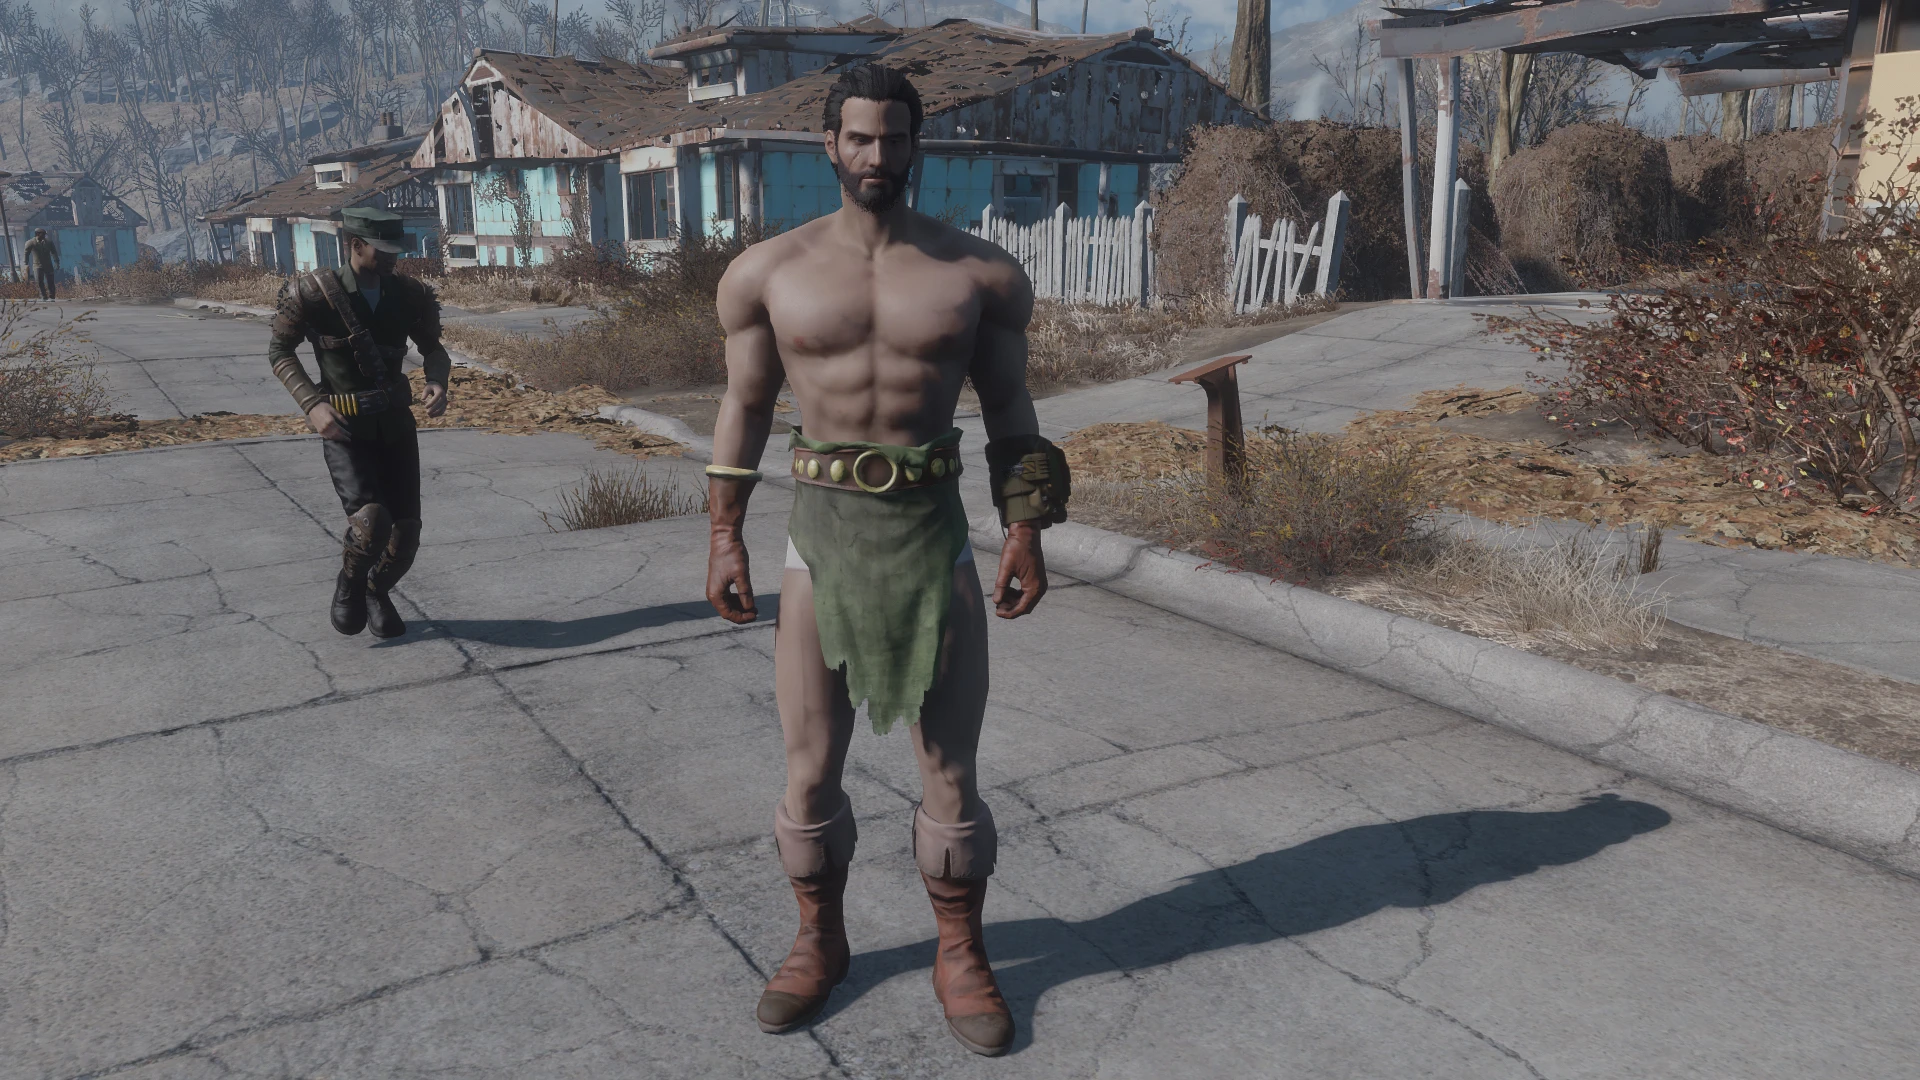 nude mods for fallout 4